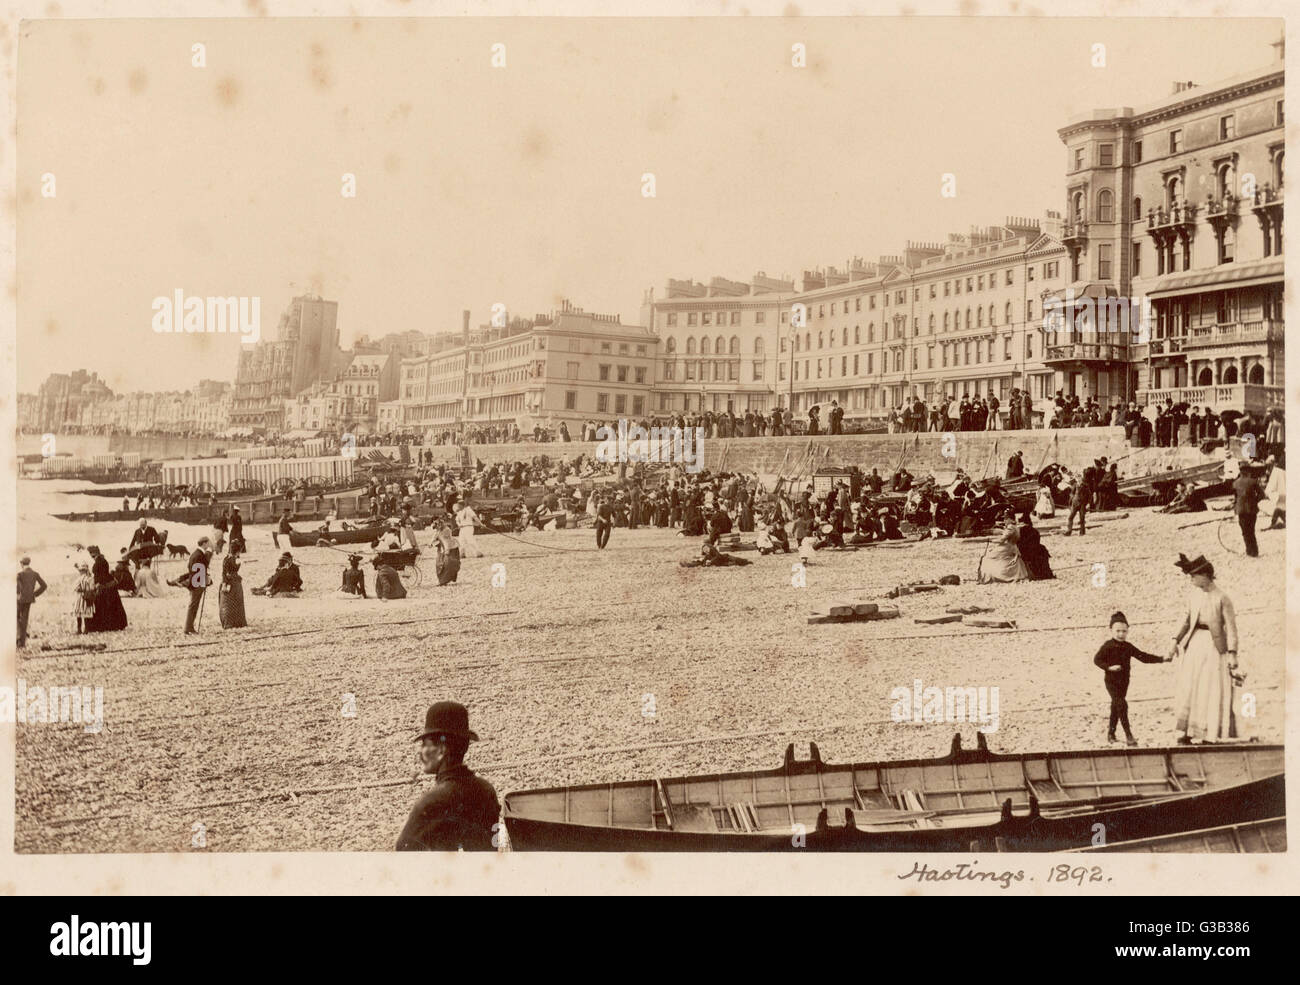 HASTINGS/PLAGE 1892 Banque D'Images